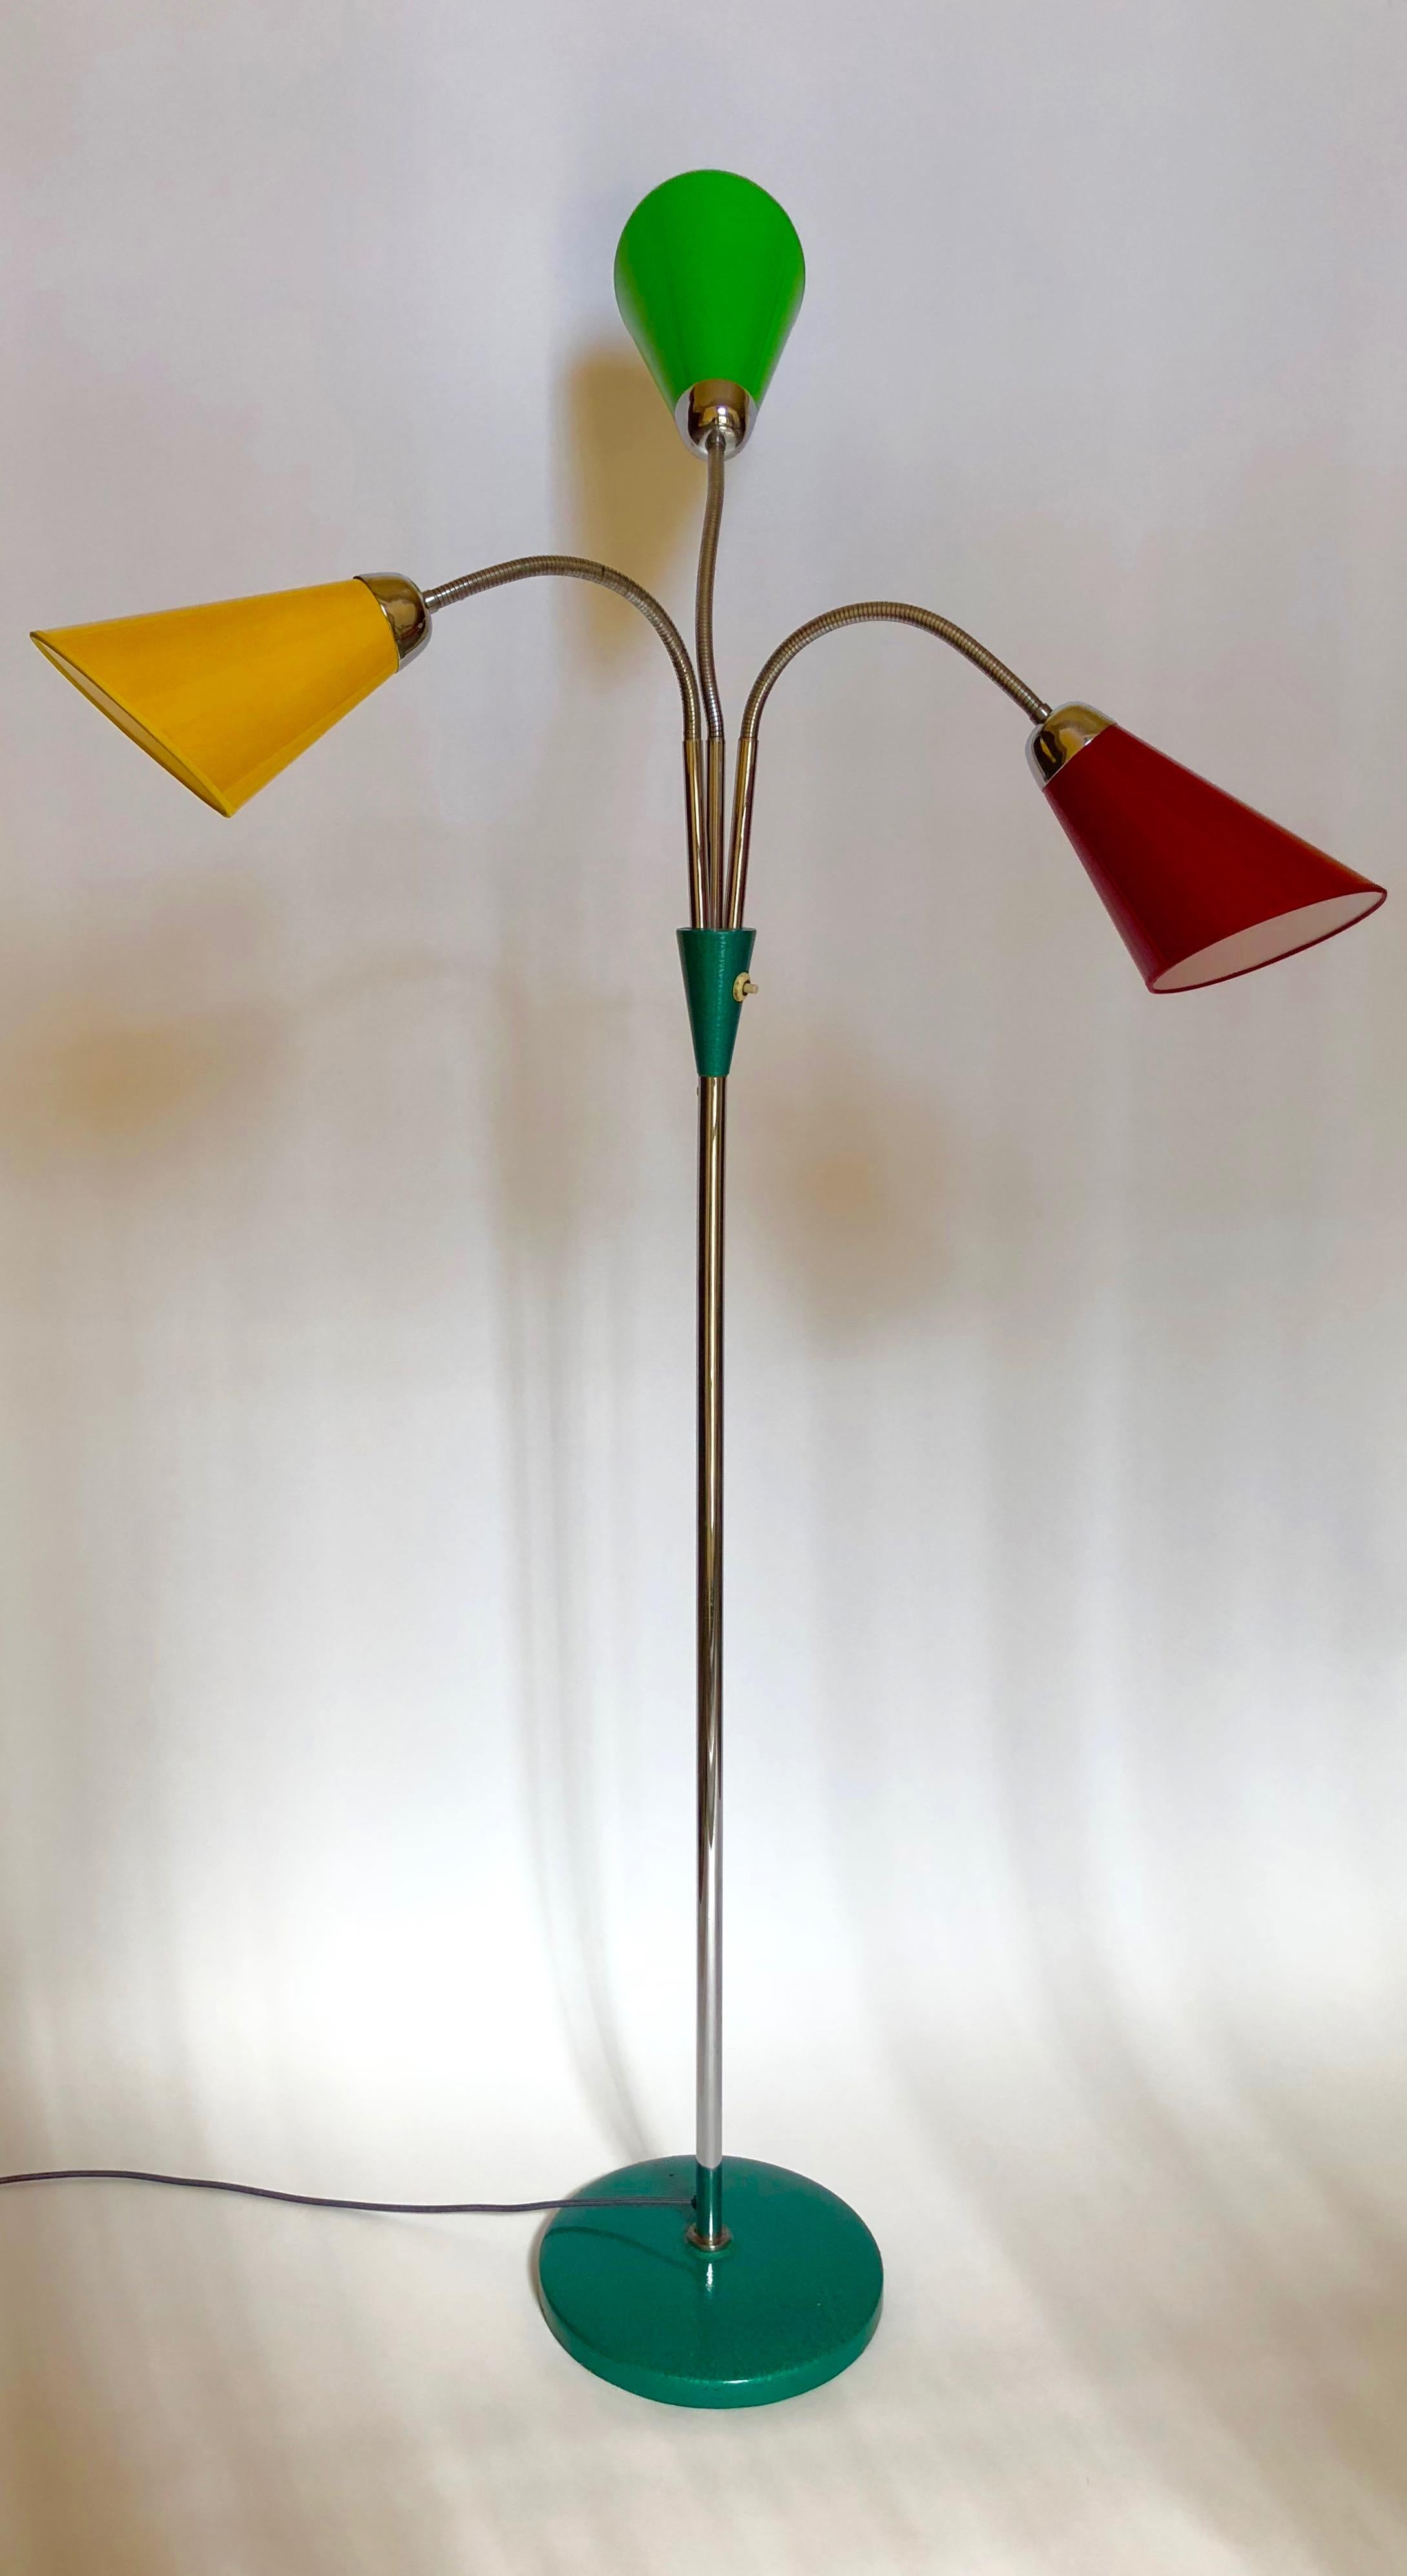 This midcentury floor lamp has a solid cast iron base coated in a hammer finish varnish.
The three arms are adjustable with a chrome finish ( 3x40 Watt Led bulbs are preferred ).
The shades are new and made after the original.
The lamp is rewired